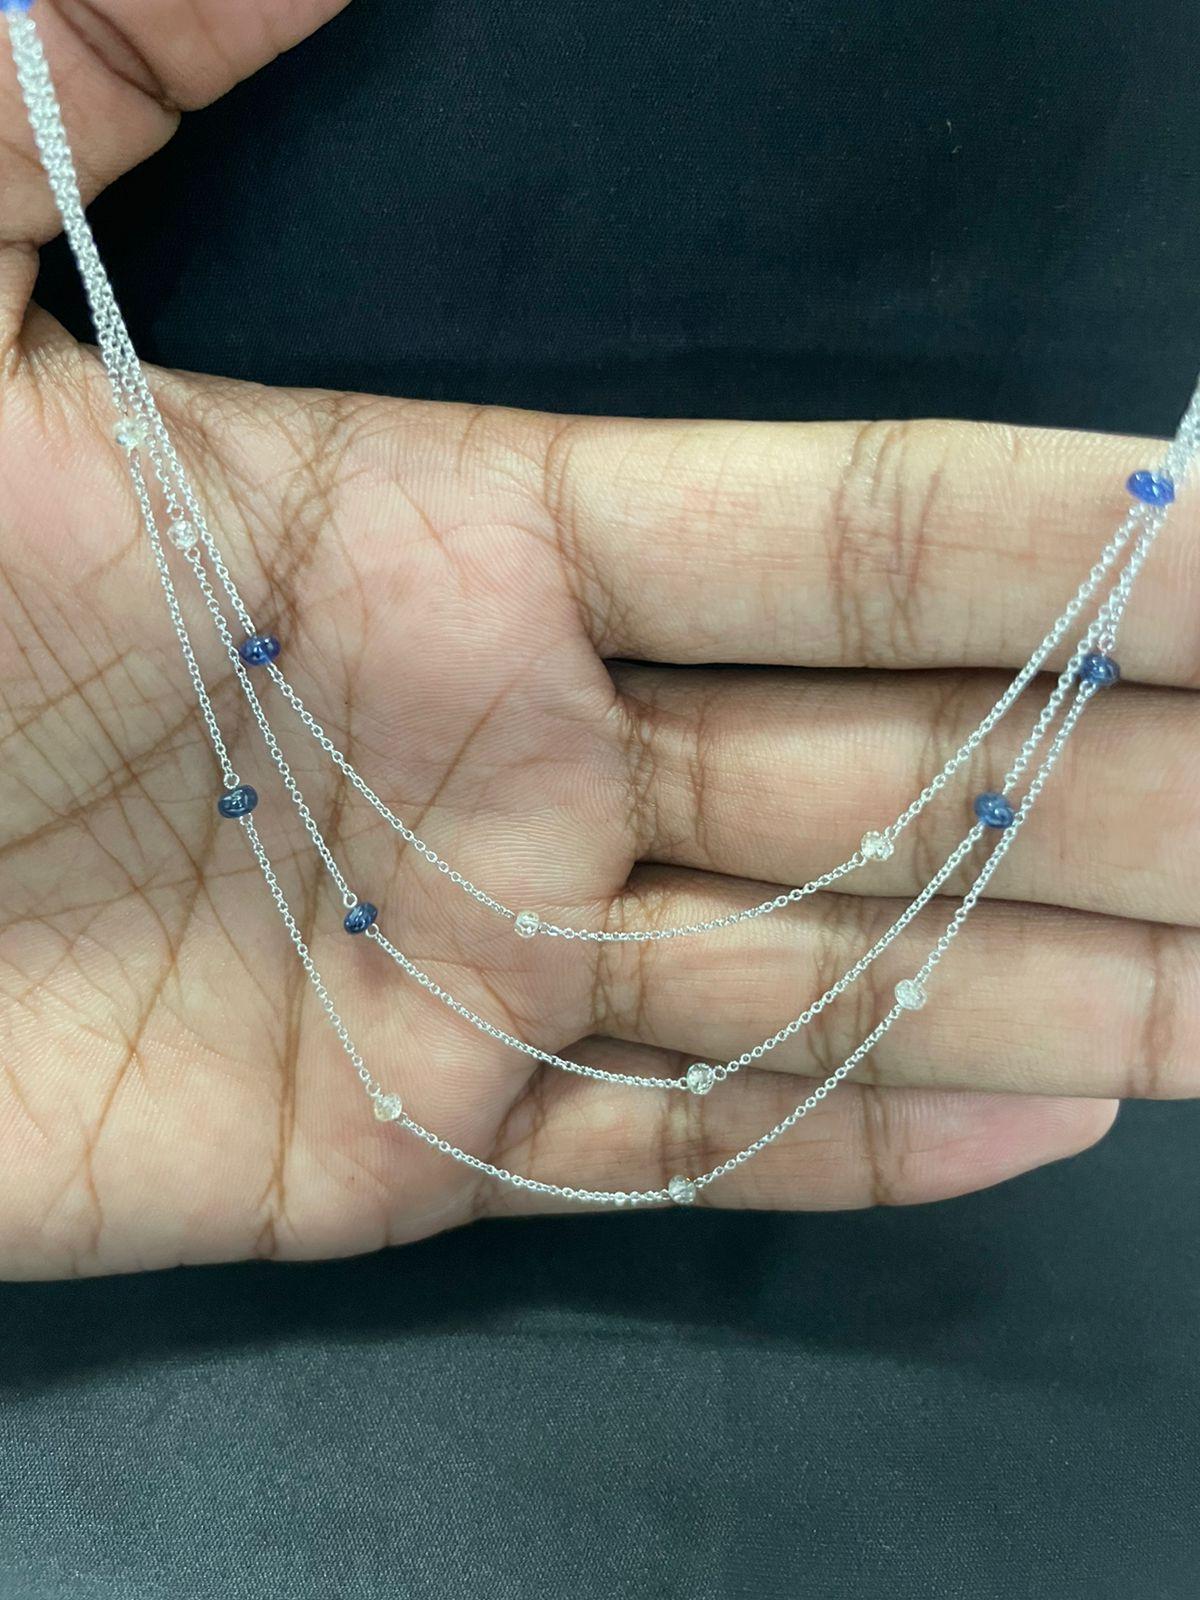 PANIM White Diamond Beads & Sapphire Tri Layer Necklace in 18 Karat White Gold

In this necklace Beads diamonds are evenly spaced on a white gold chain having a total of 3.80cts. This is a piece that can be worn everyday, alone or layered with other